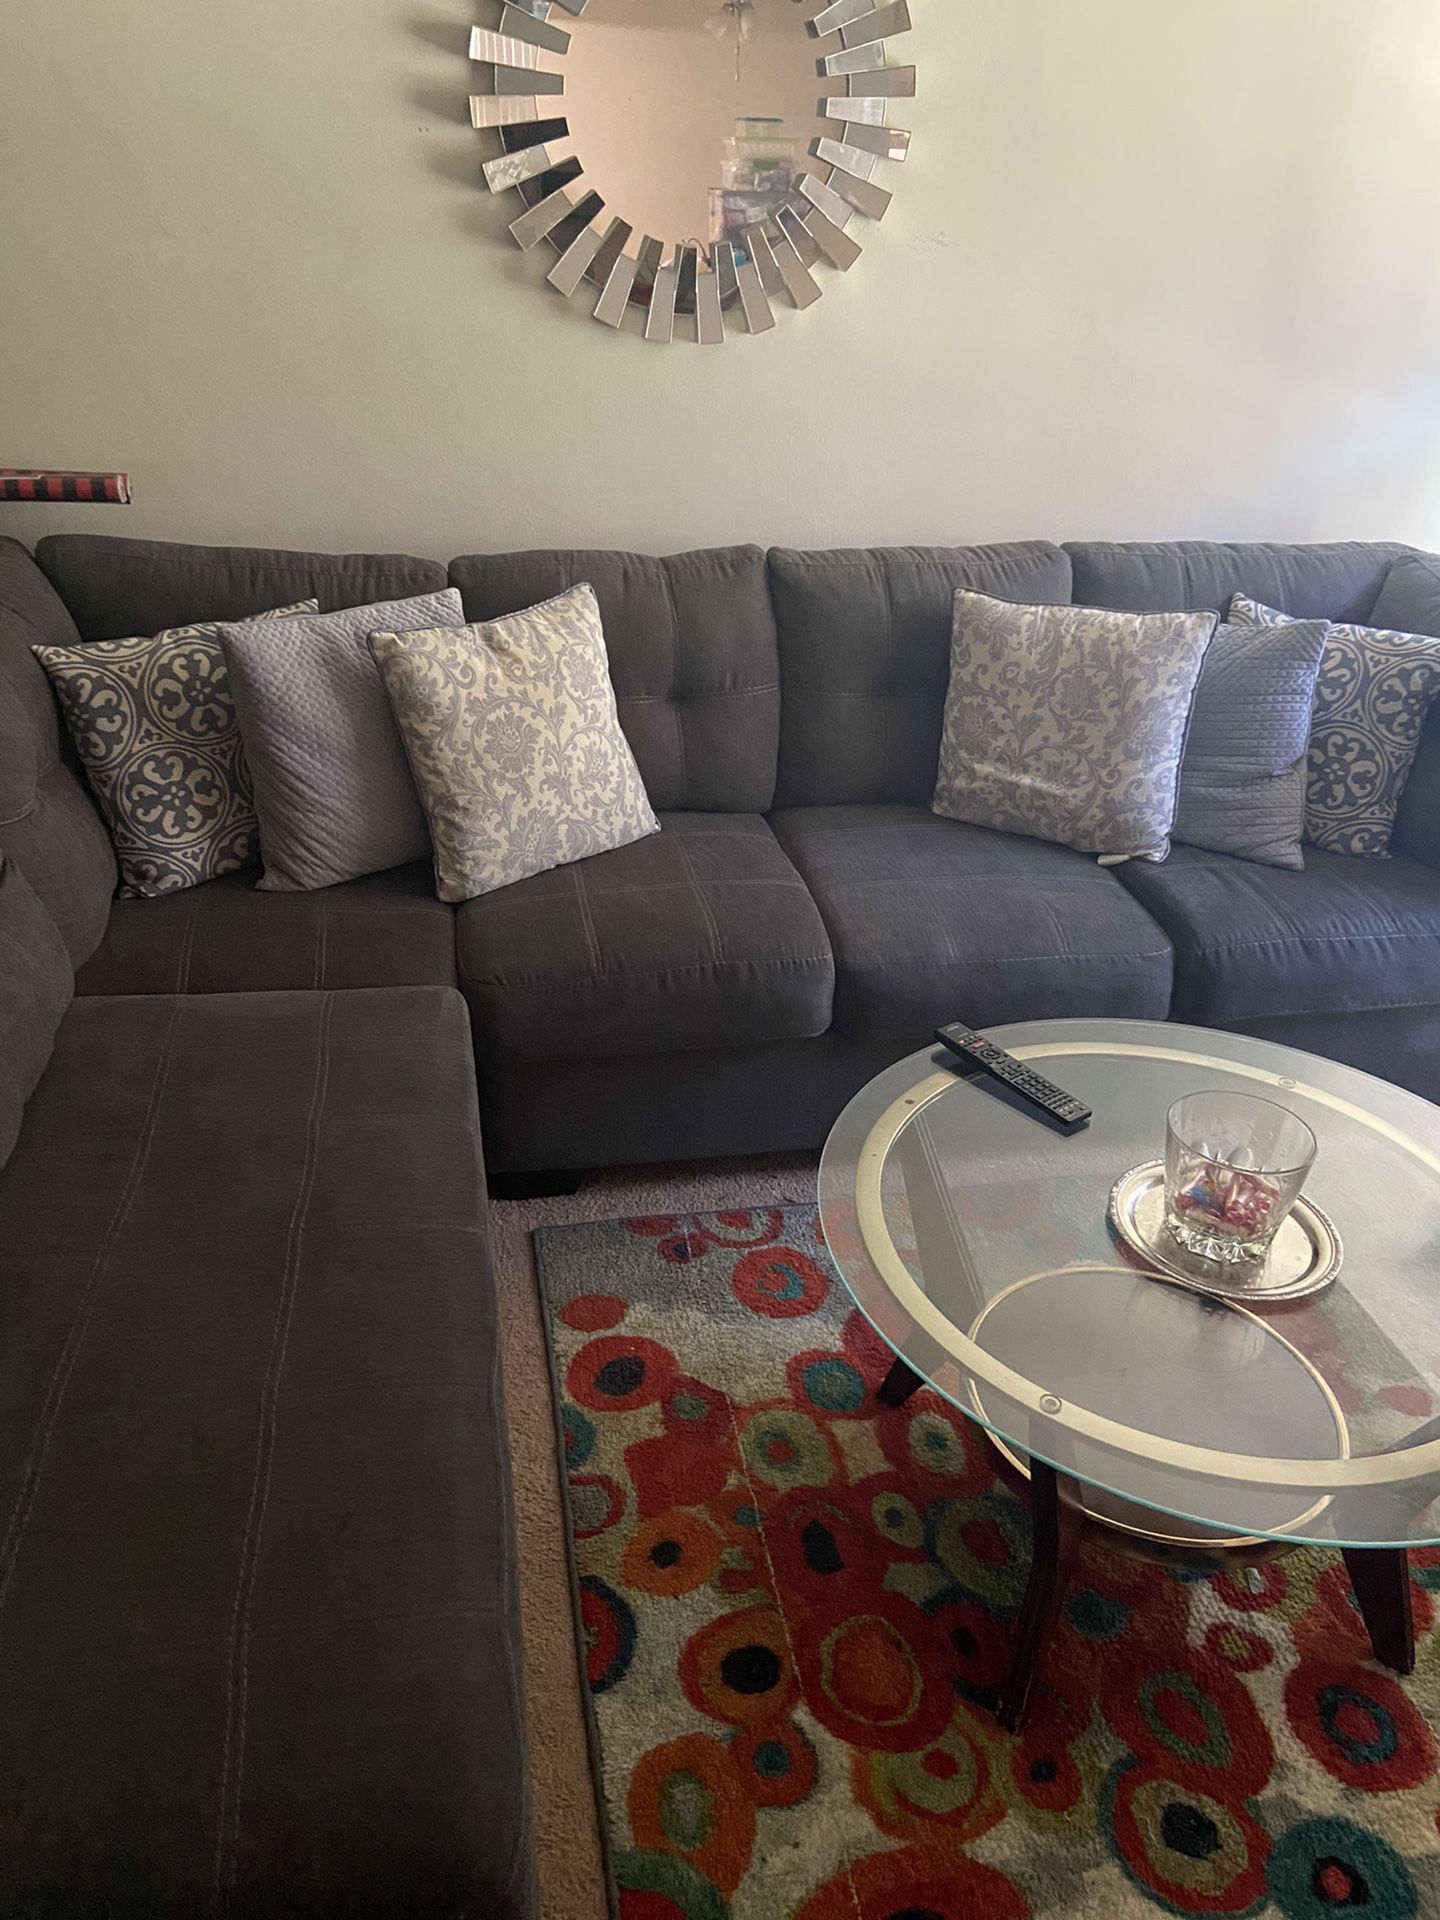 Gray Ashley furniture Sectional living room set in like new condition